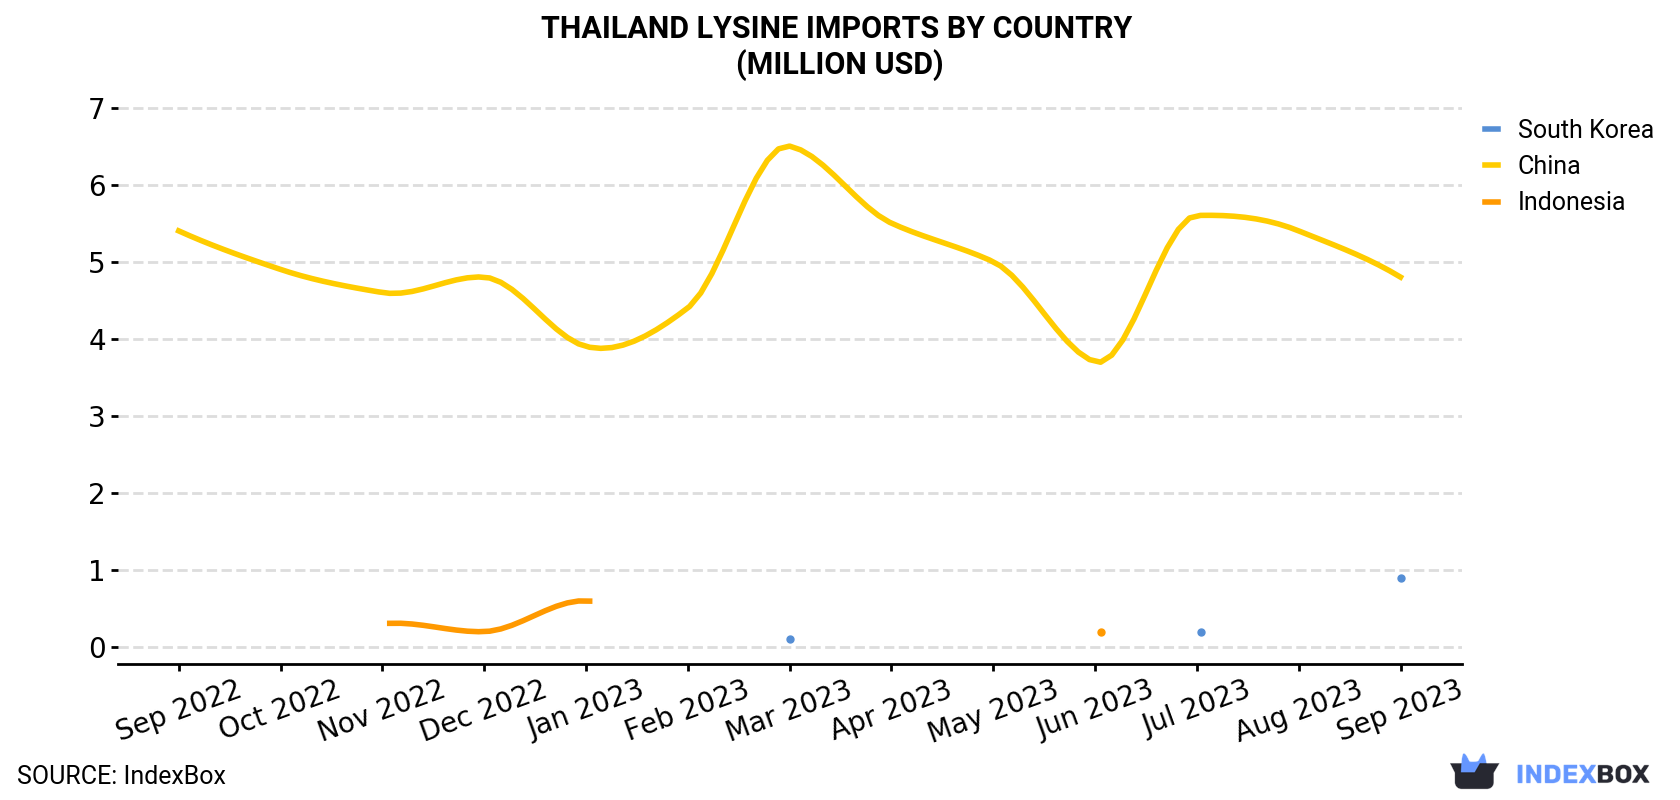 Thailand Lysine Imports By Country (Million USD)